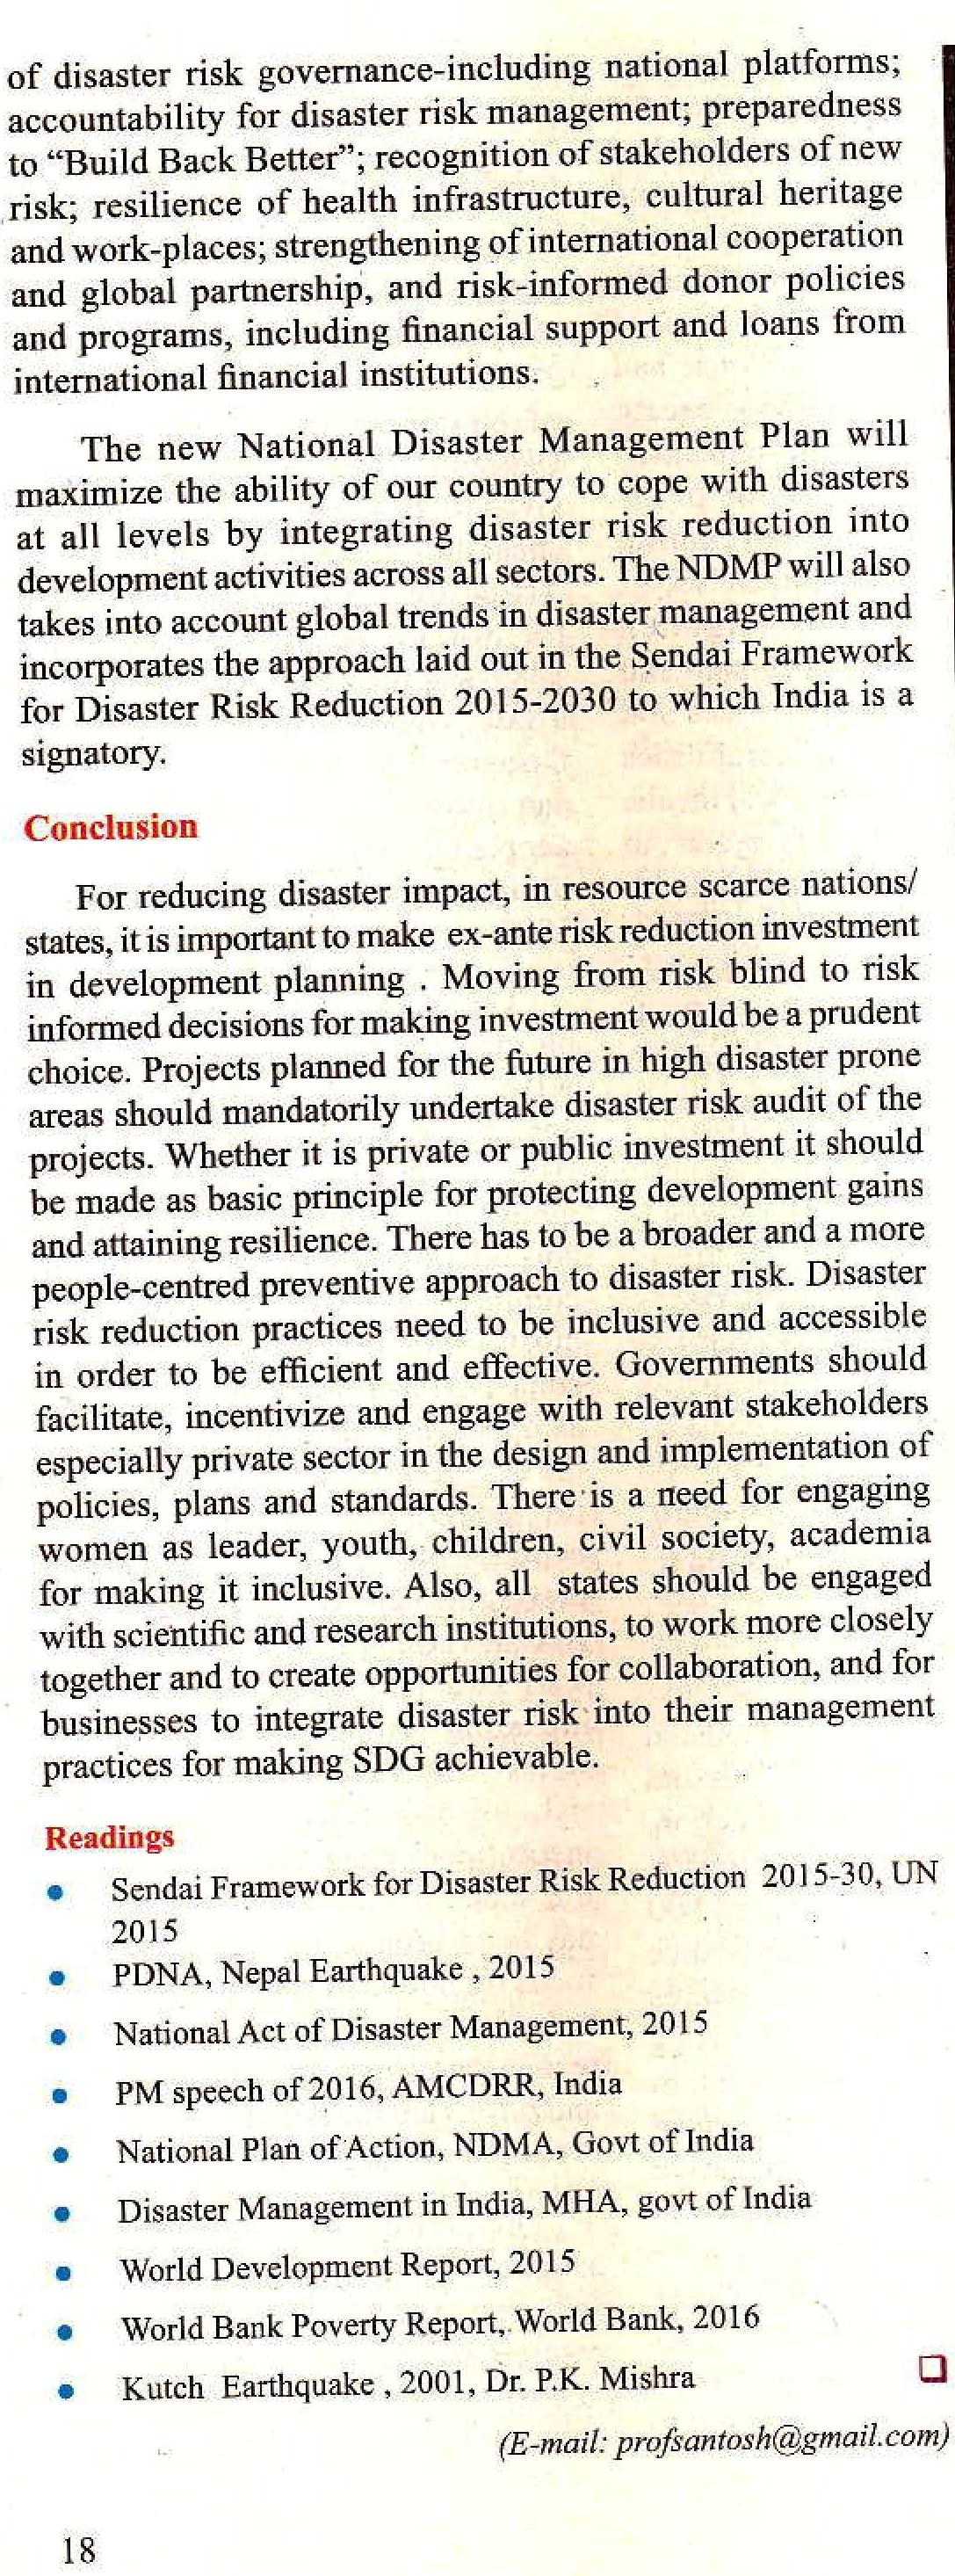 article on disaster management